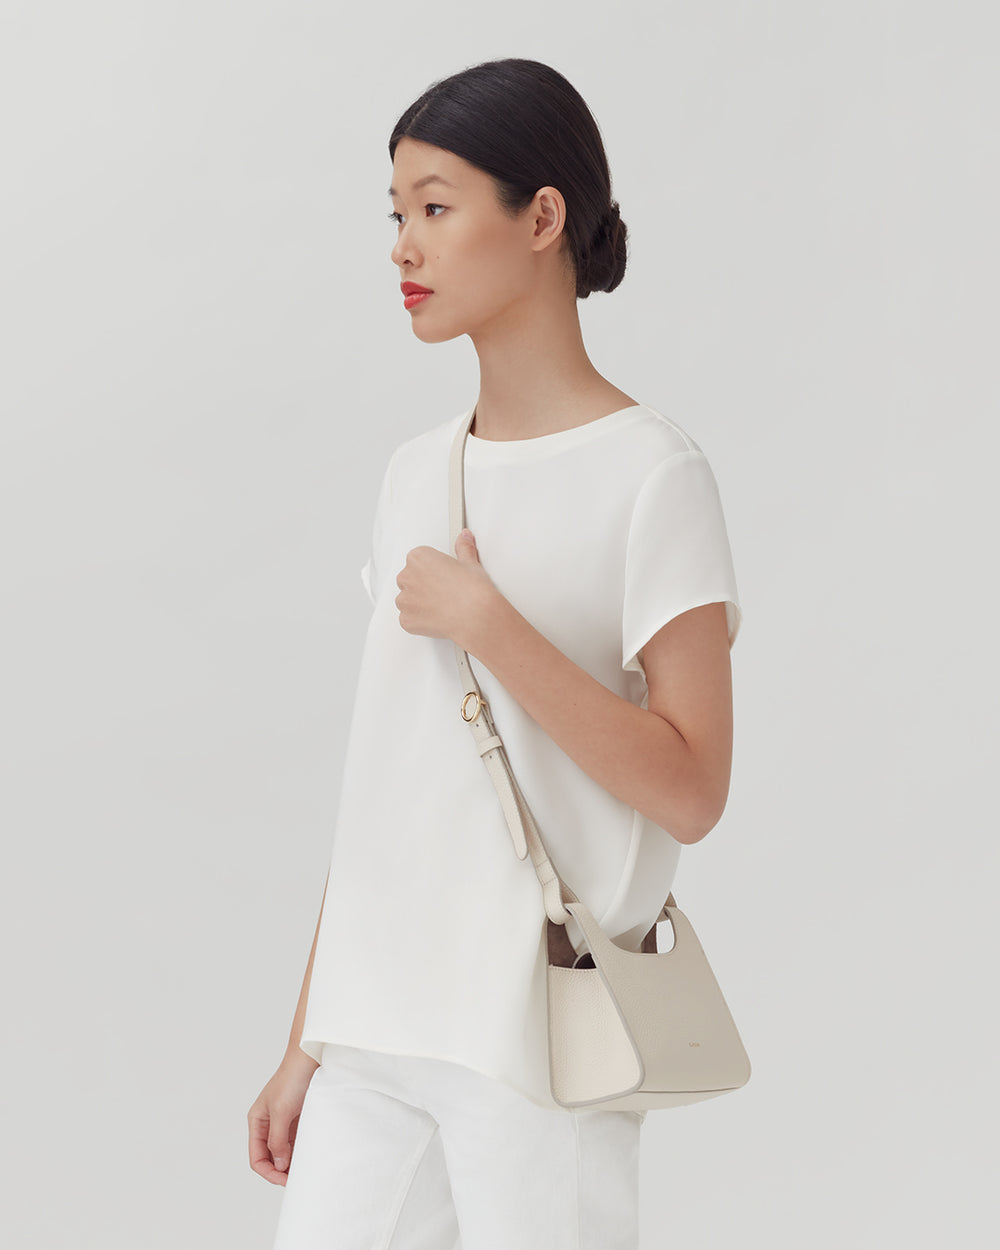 Woman standing and holding a shoulder bag